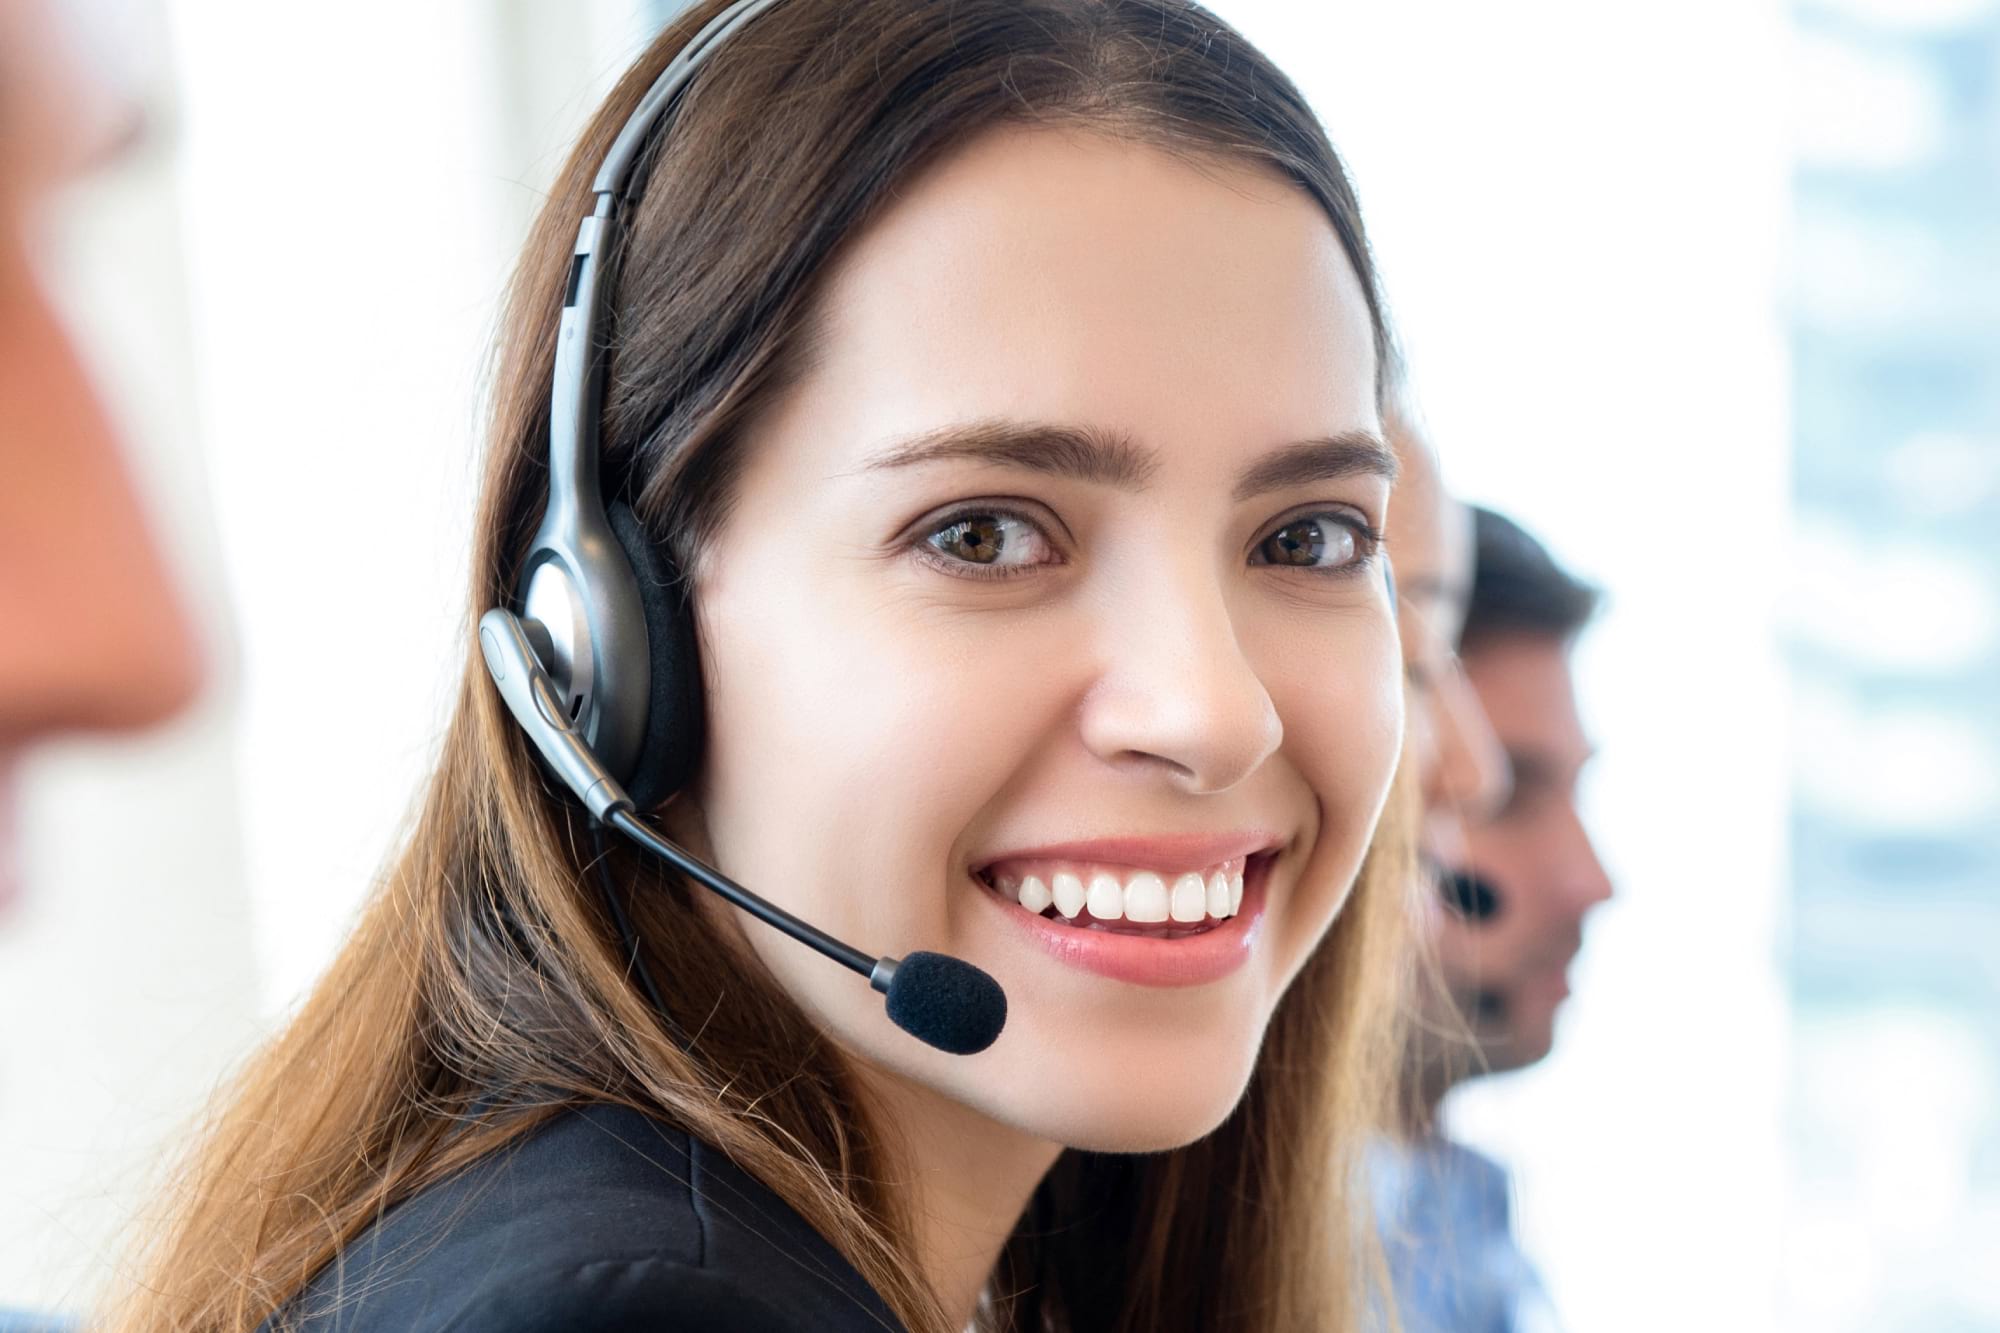 The Basics of Support: Customer Service vs Customer Experience